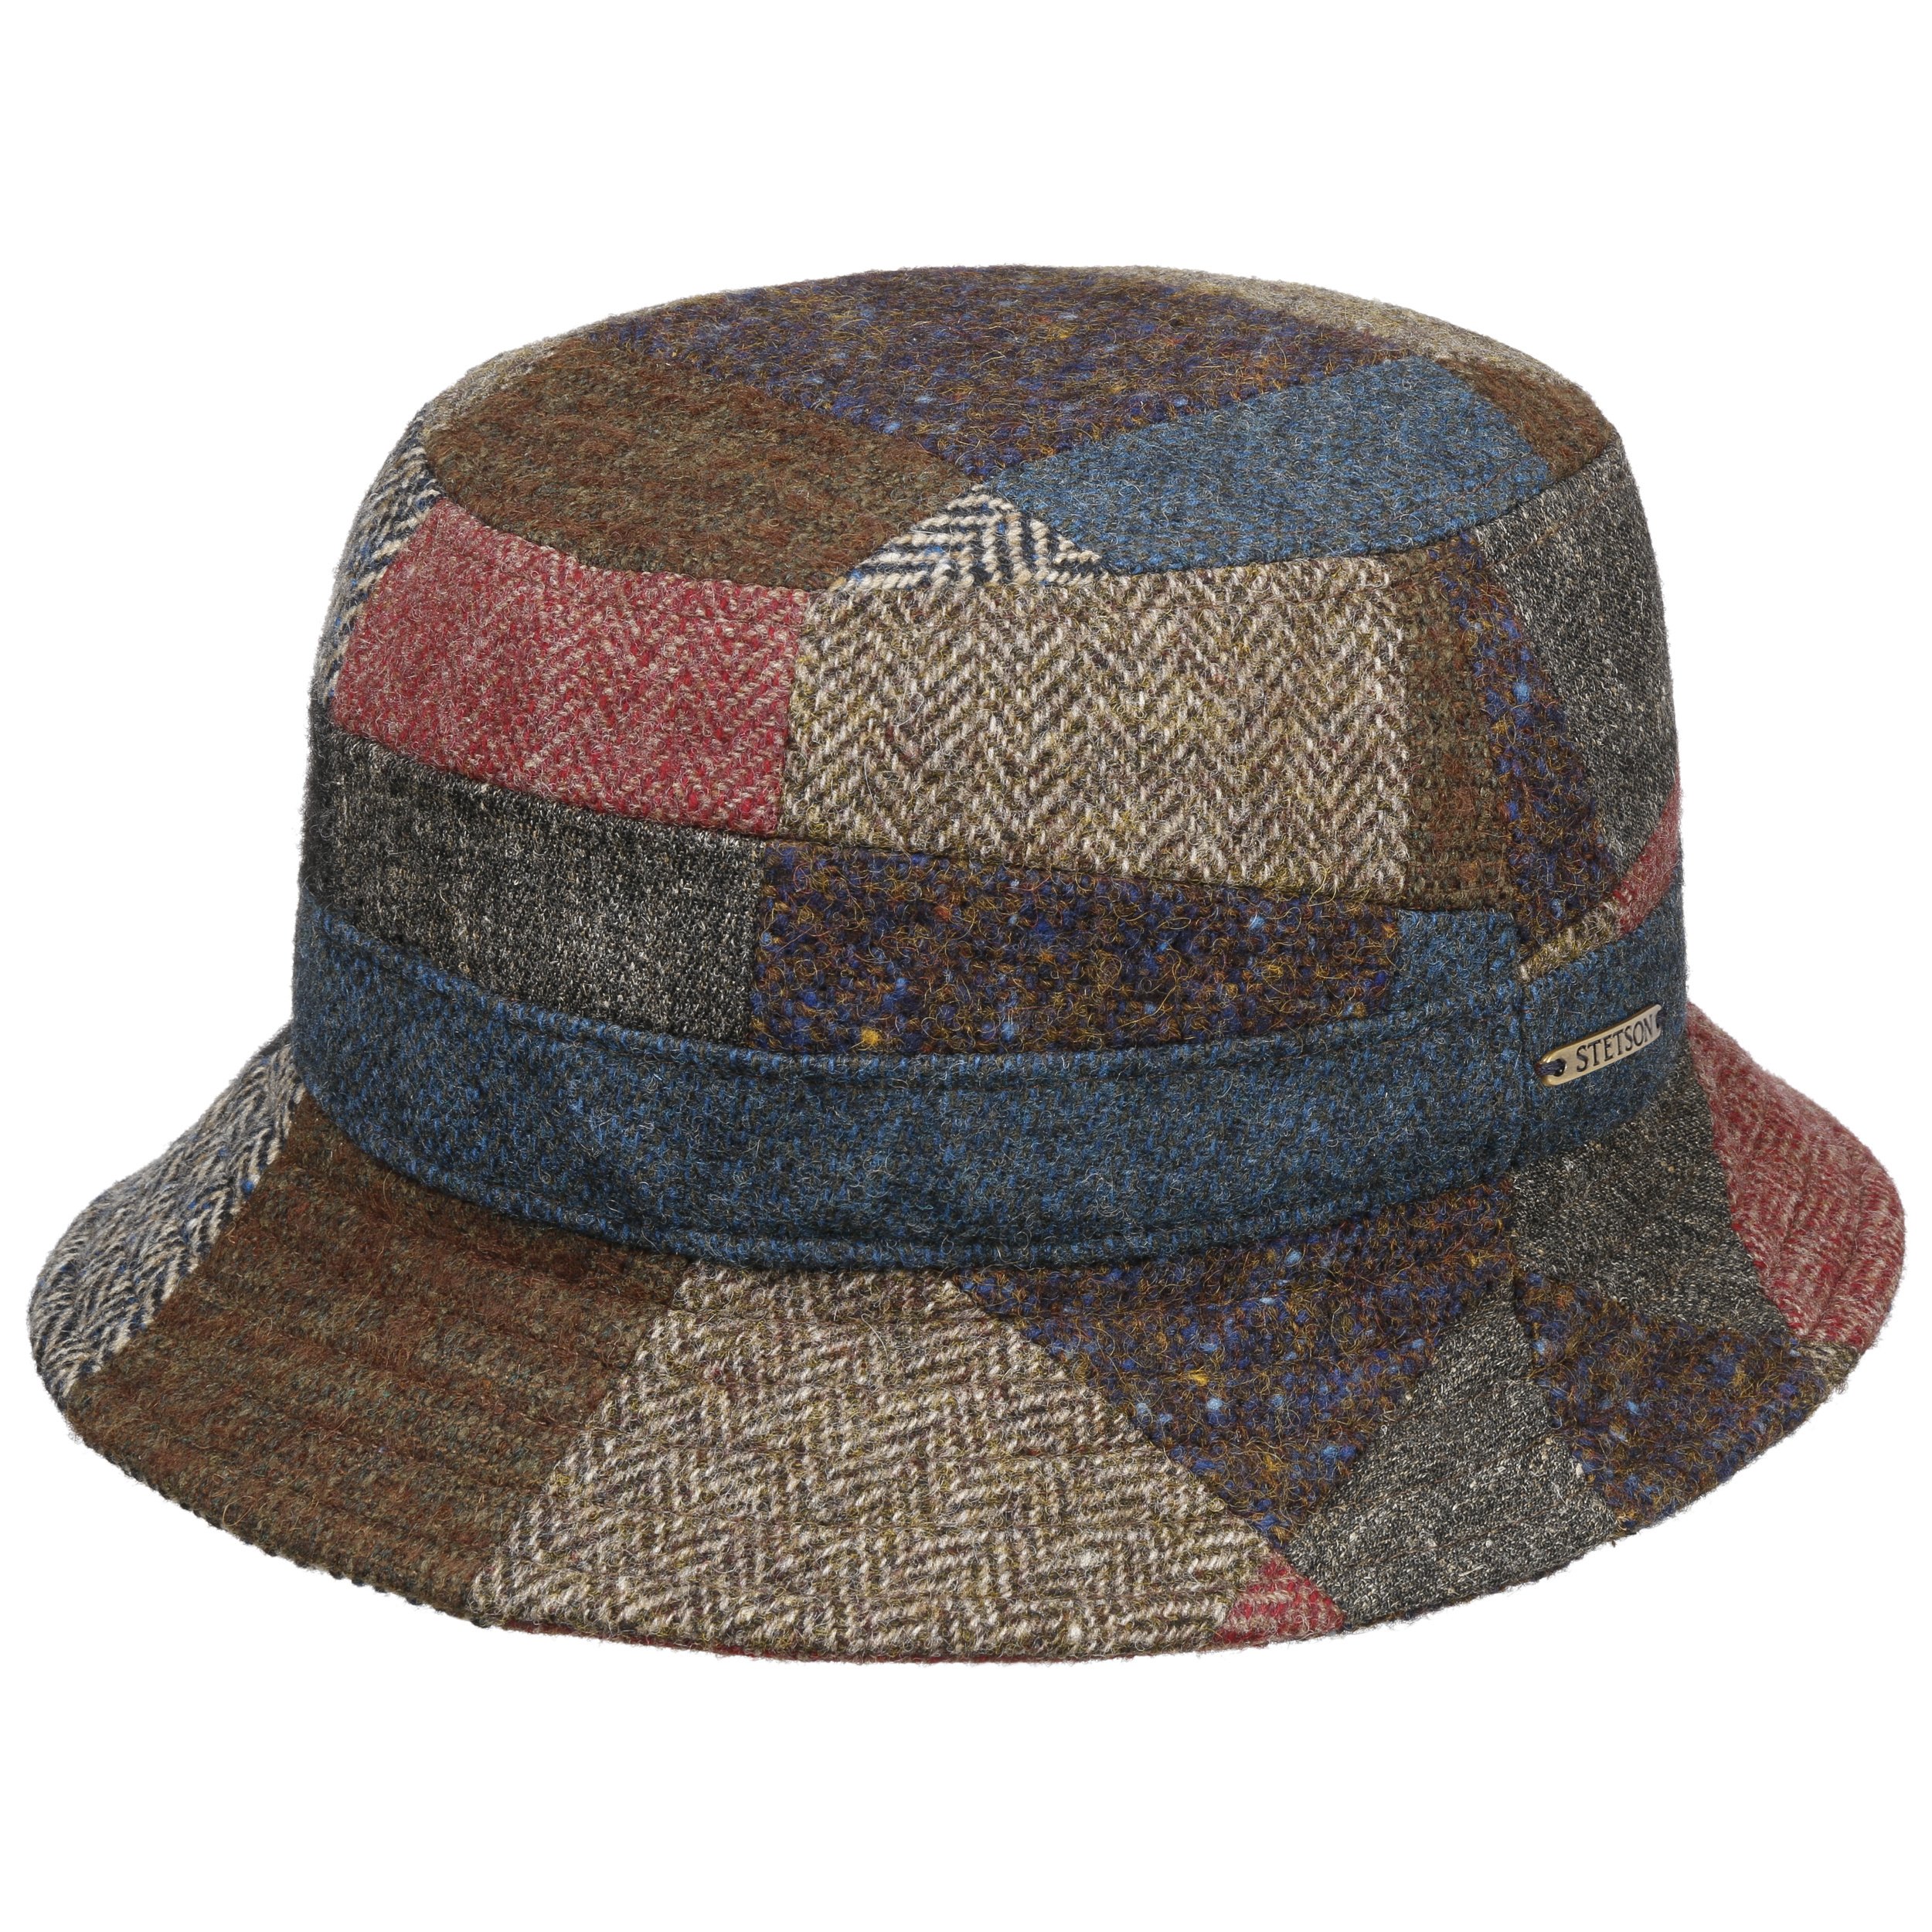 Patchwork Bucket Hat by Stetson - 69,00